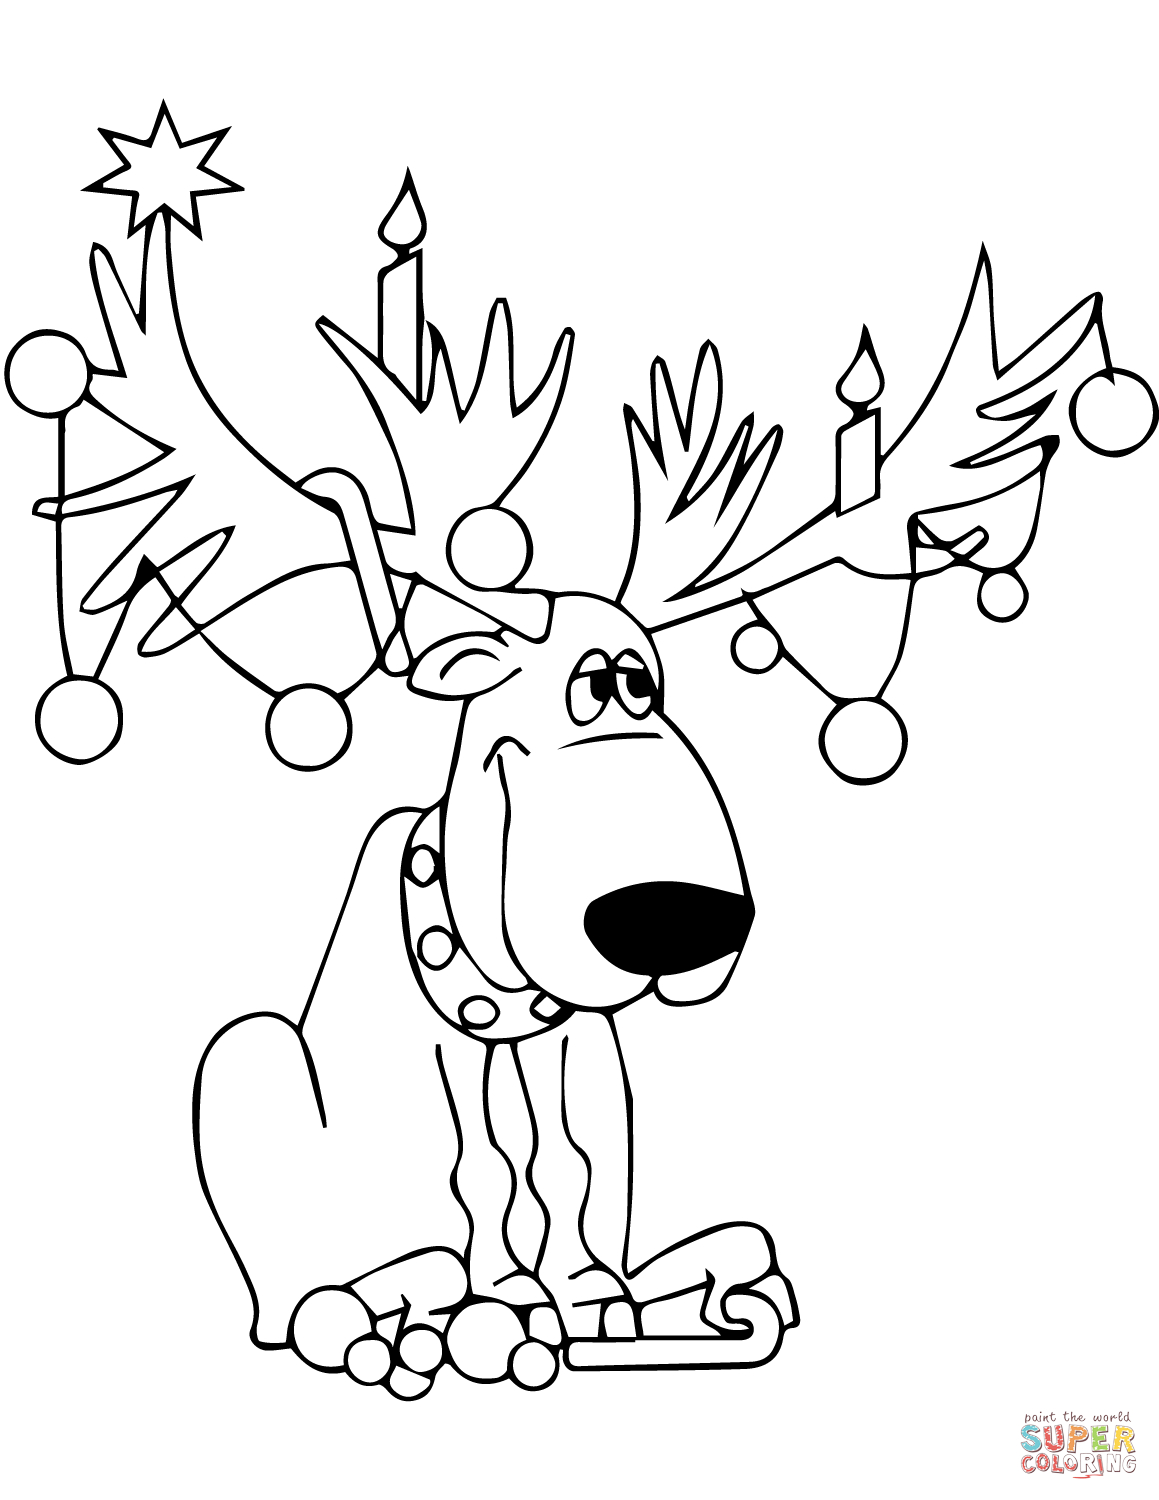 Christmas Lights Coloring Pages | Free Coloring Pages - Free Printable Christmas Lights Coloring Pages